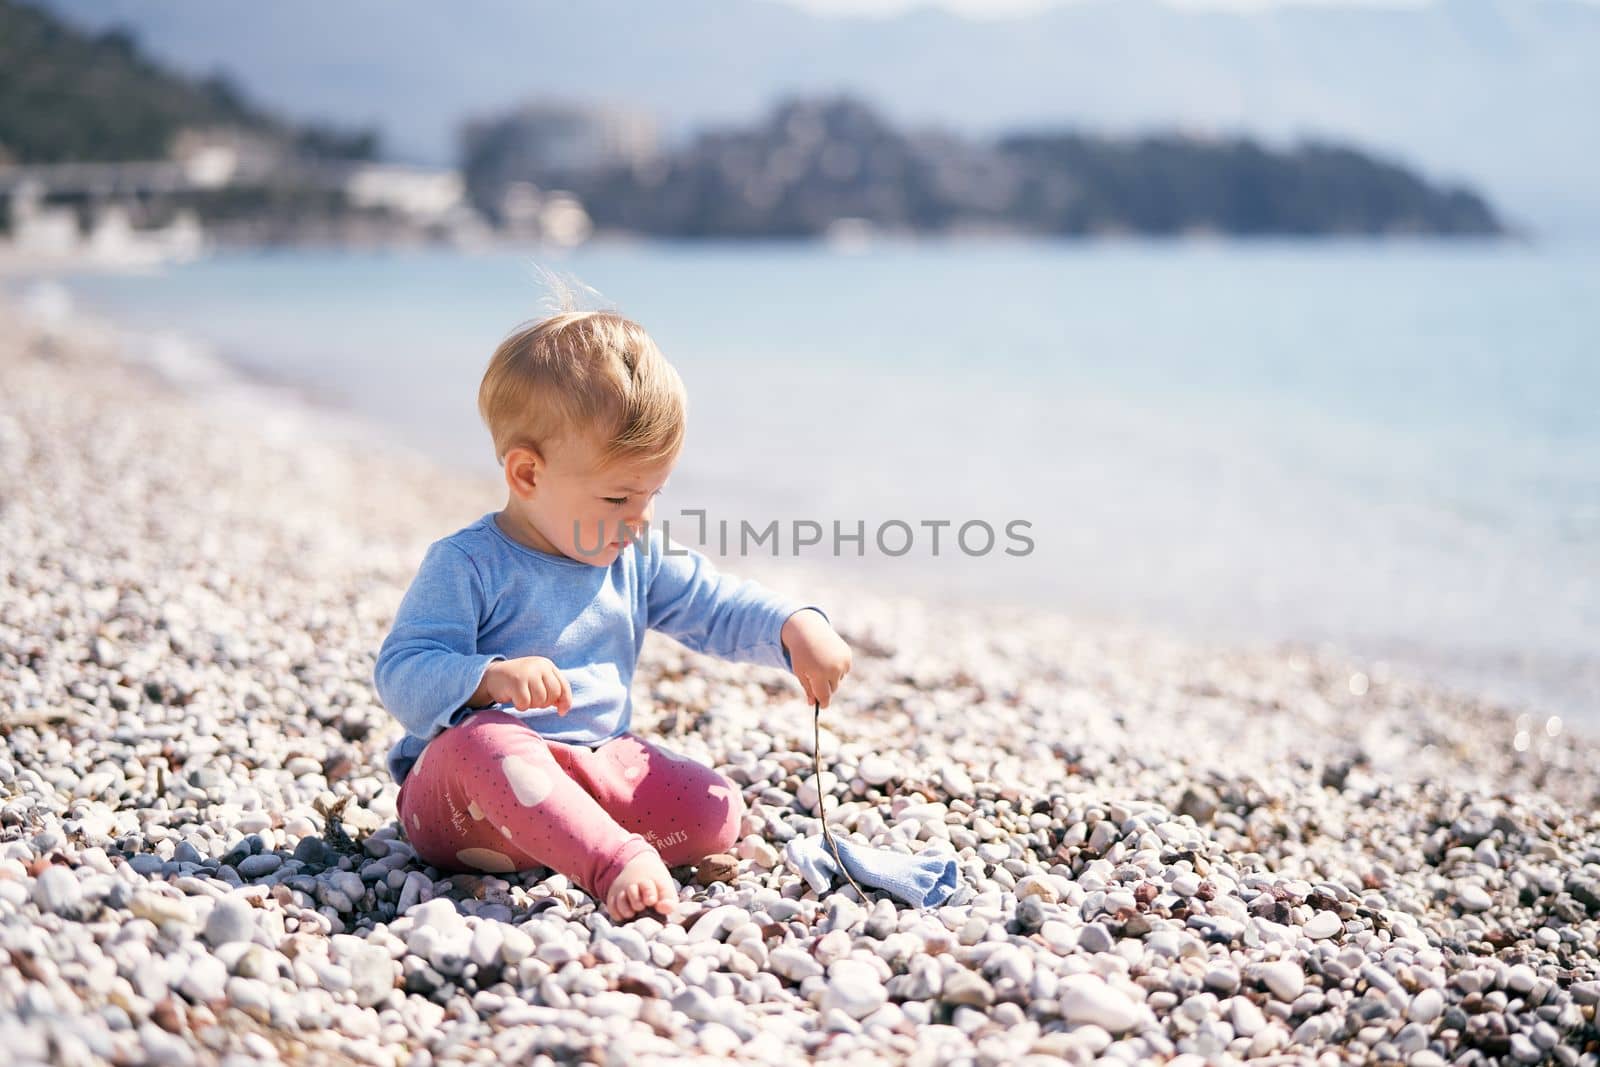 Little kid in a blue blouse and red pants sits on a pebble beach holding a stick in his hand. High quality photo